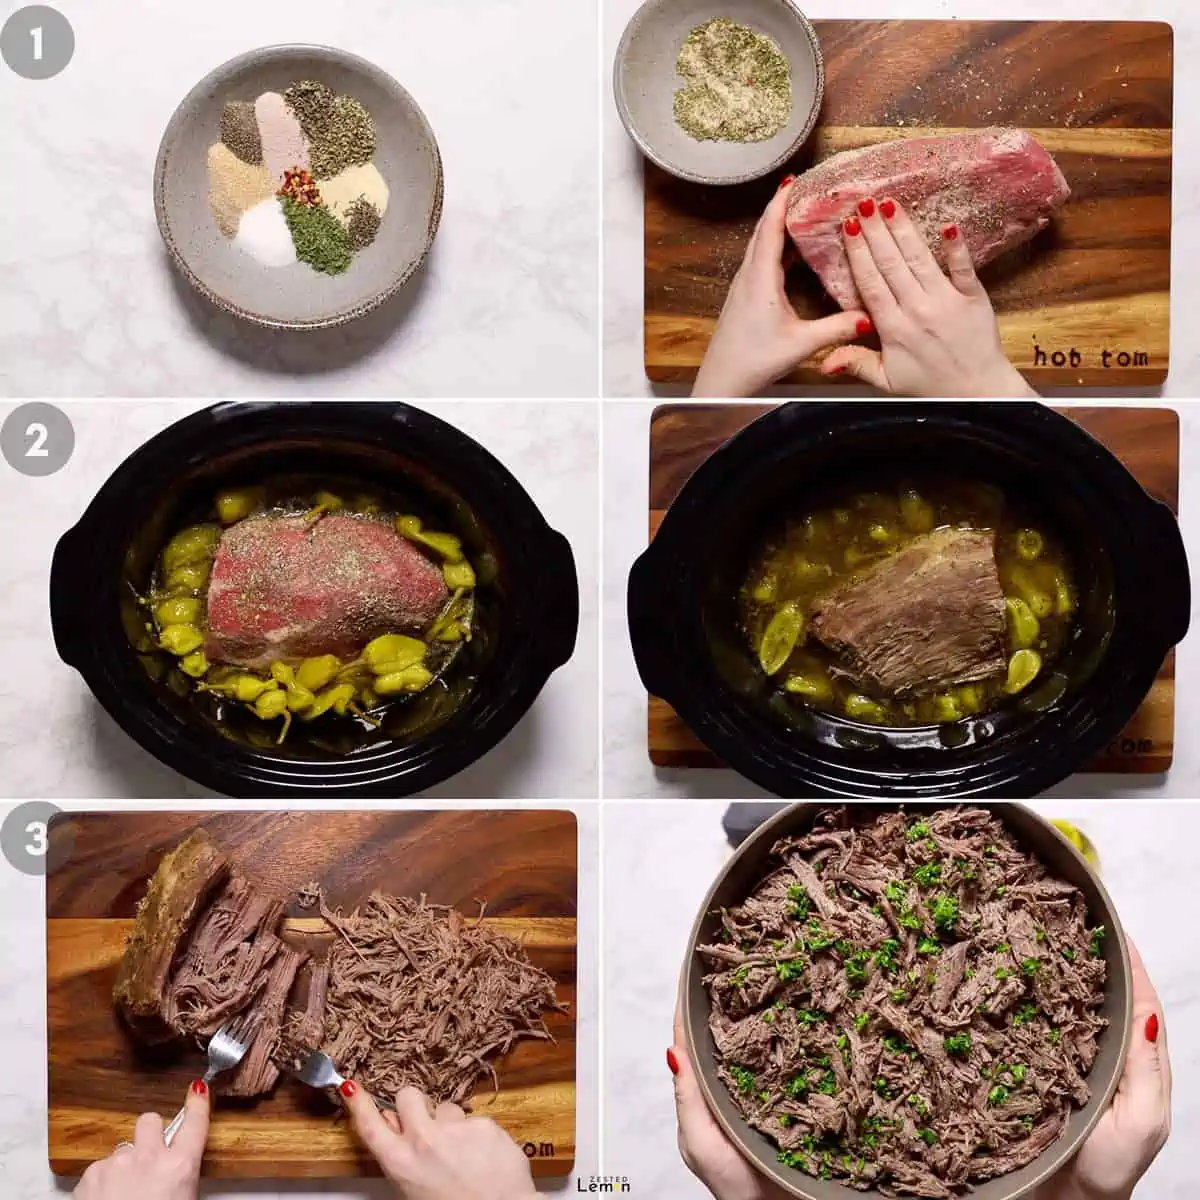 Step by step instructions to make Italian beef. 